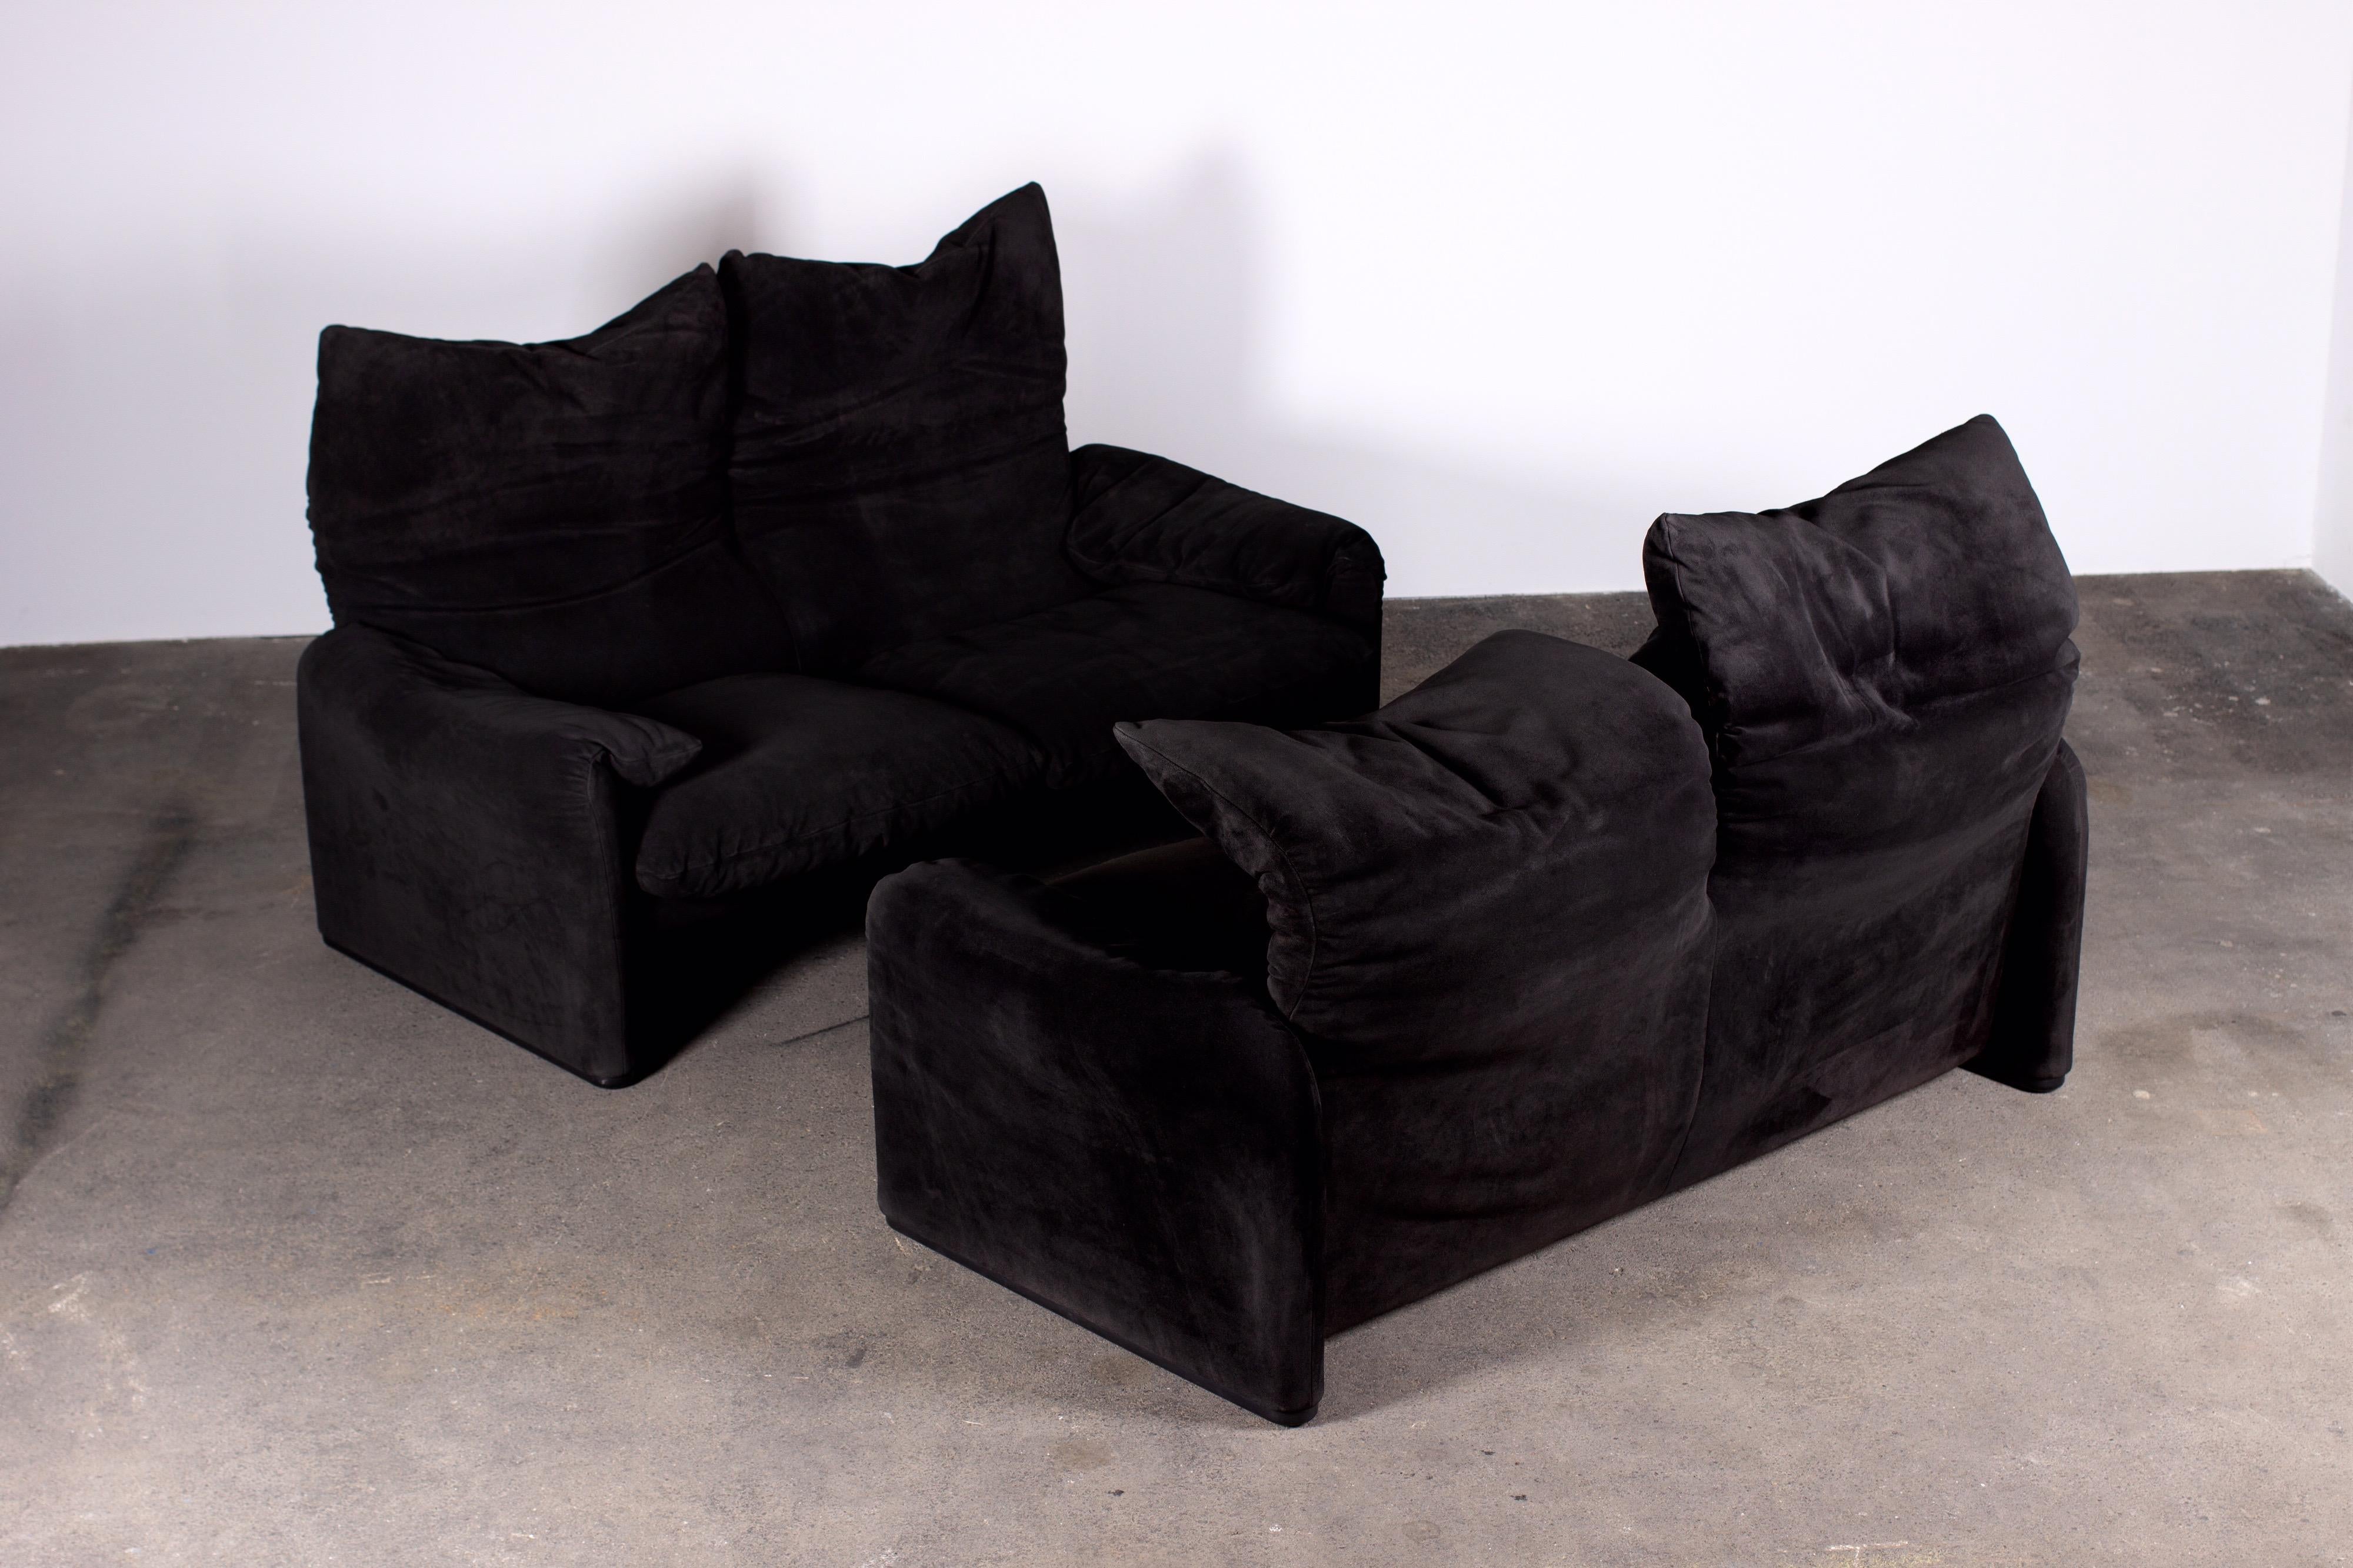 Late 20th Century Pair of Black Suede 2-Seater Maralunga Sofas by Vico Magistretti for Cassina